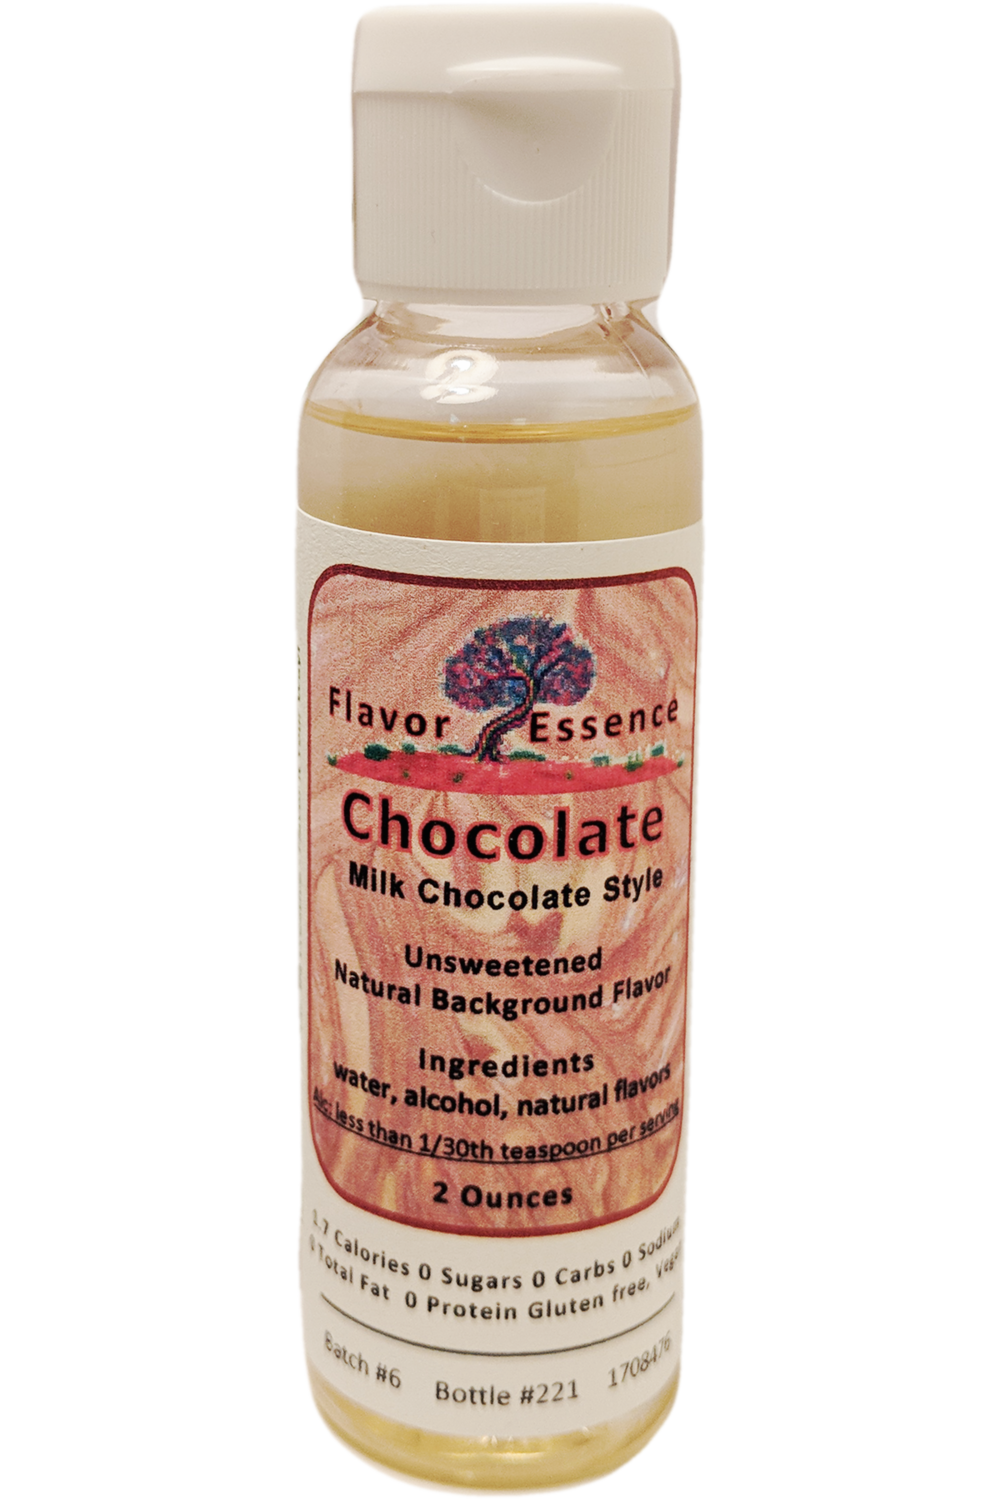 Flavor Essence Chocolate 2oz - Natural Unsweetened Background Flavoring